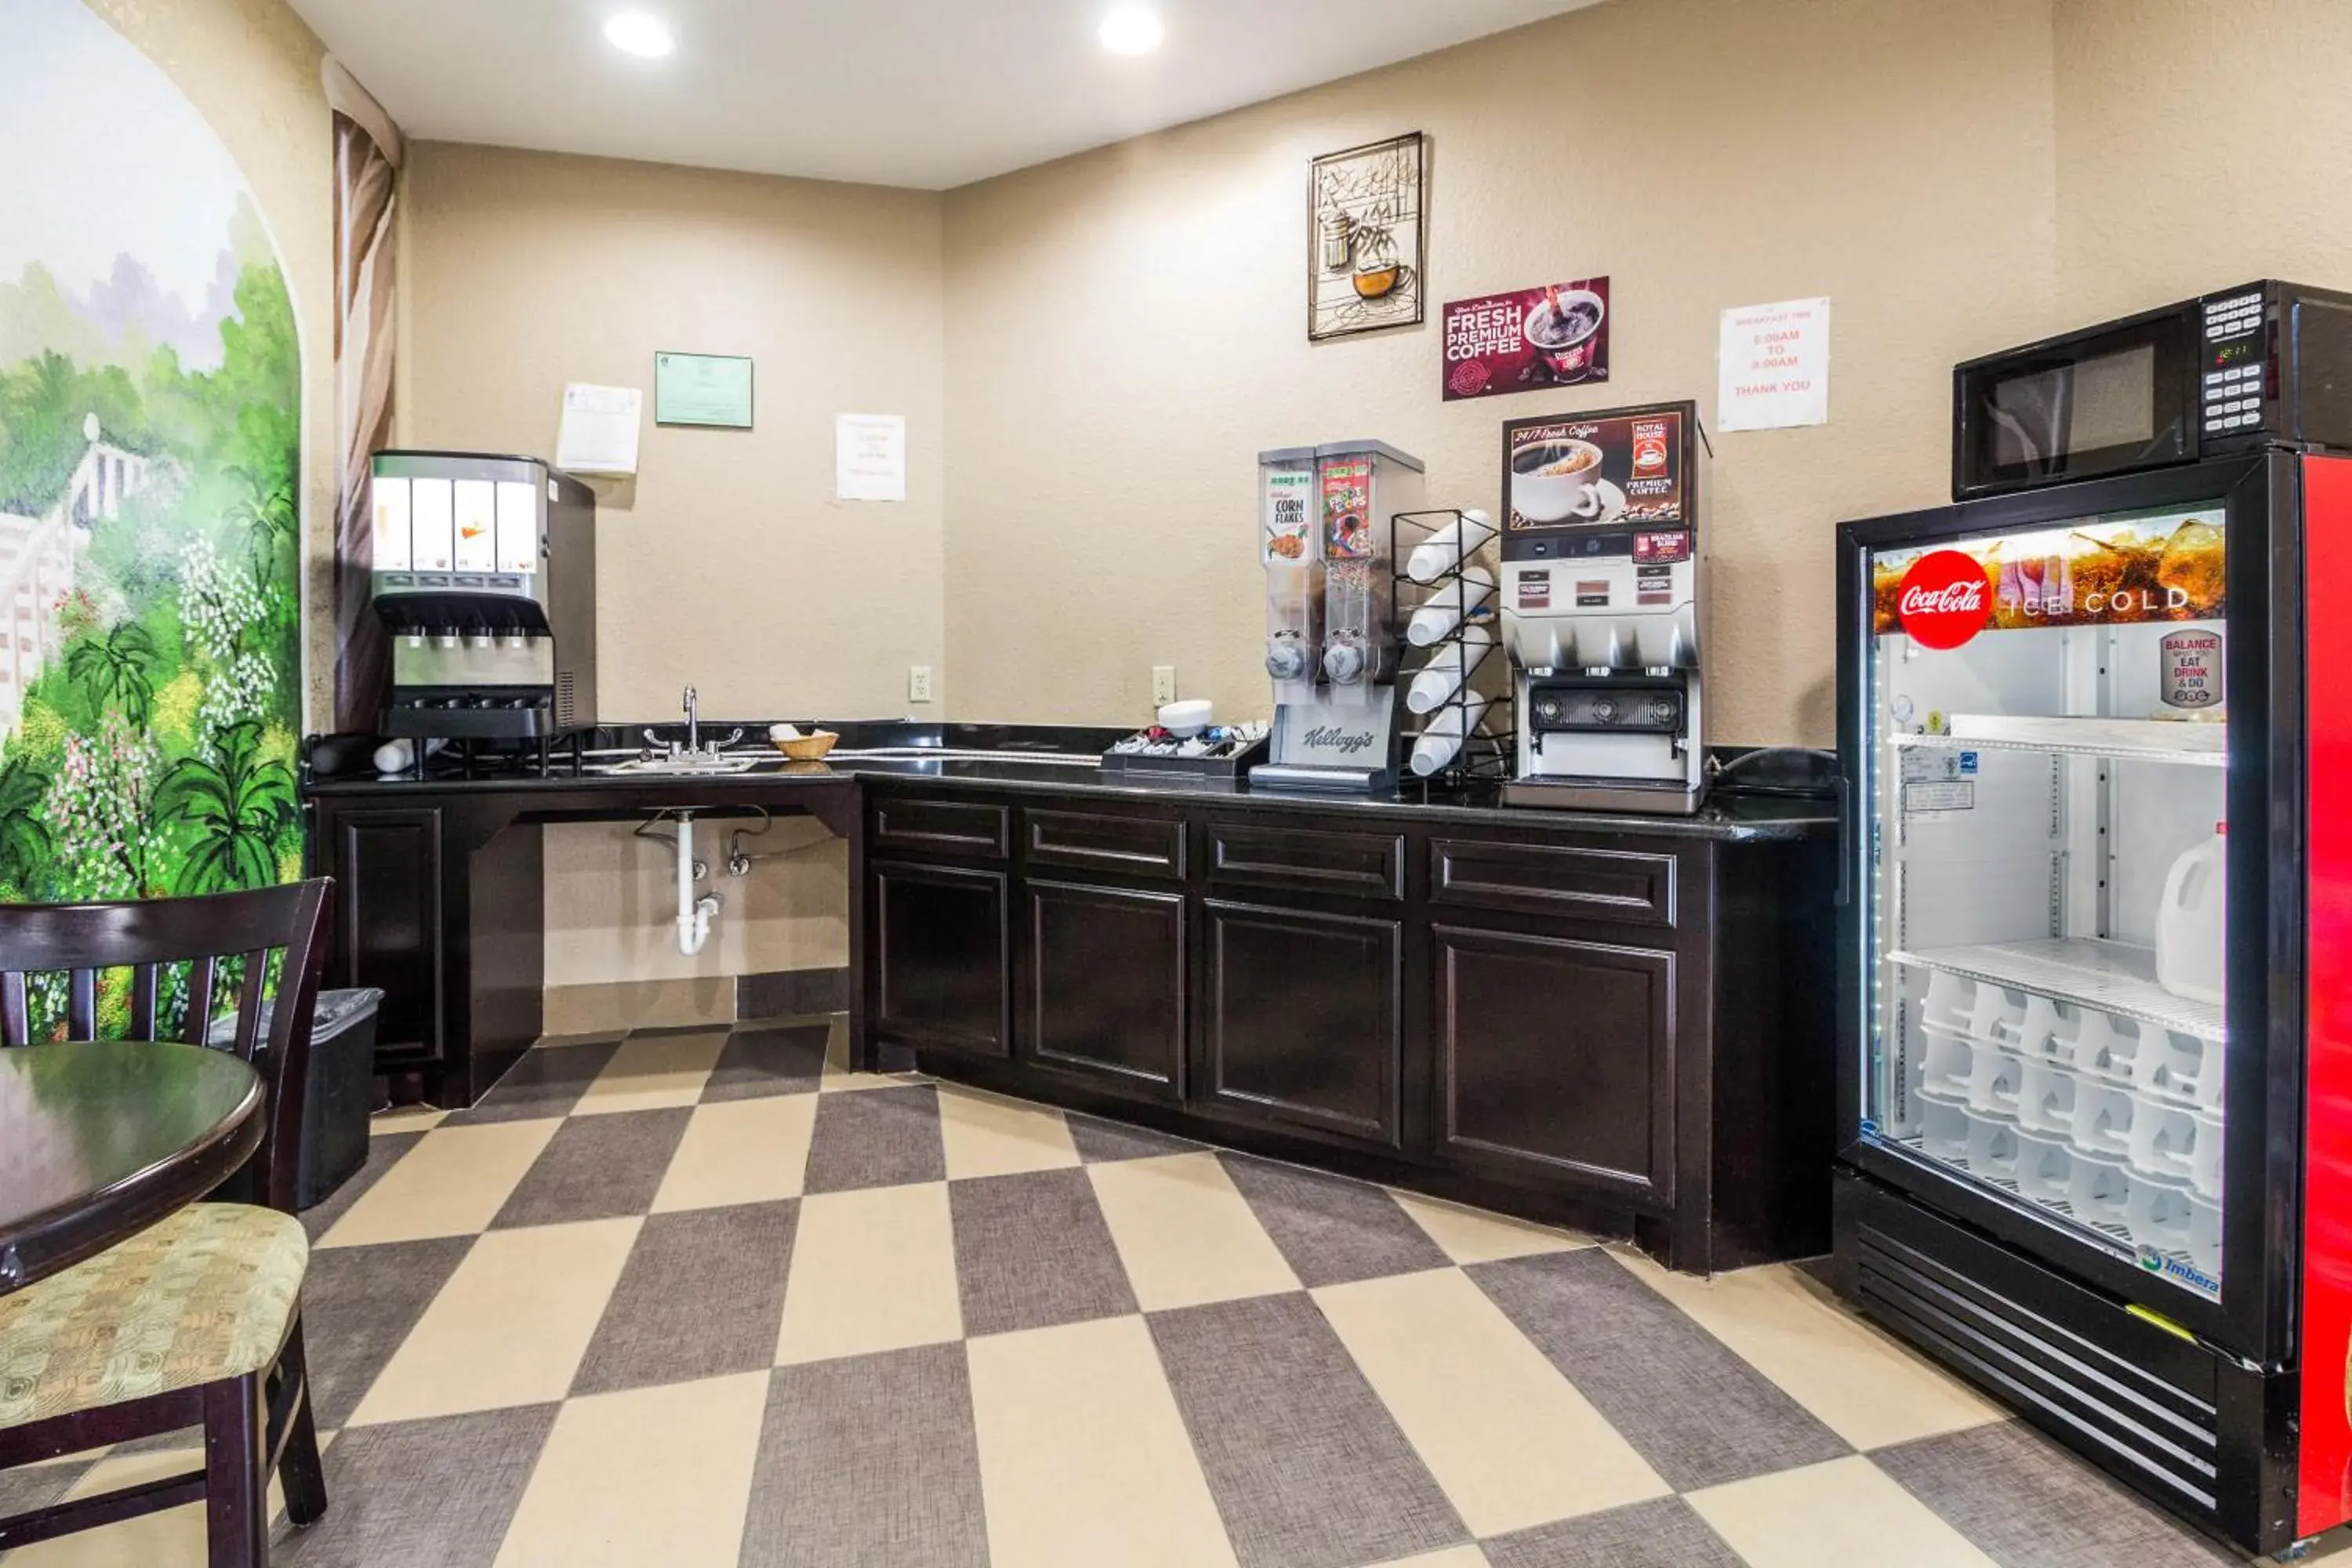 Continental breakfast in Scottish Inn and Suites Baytown